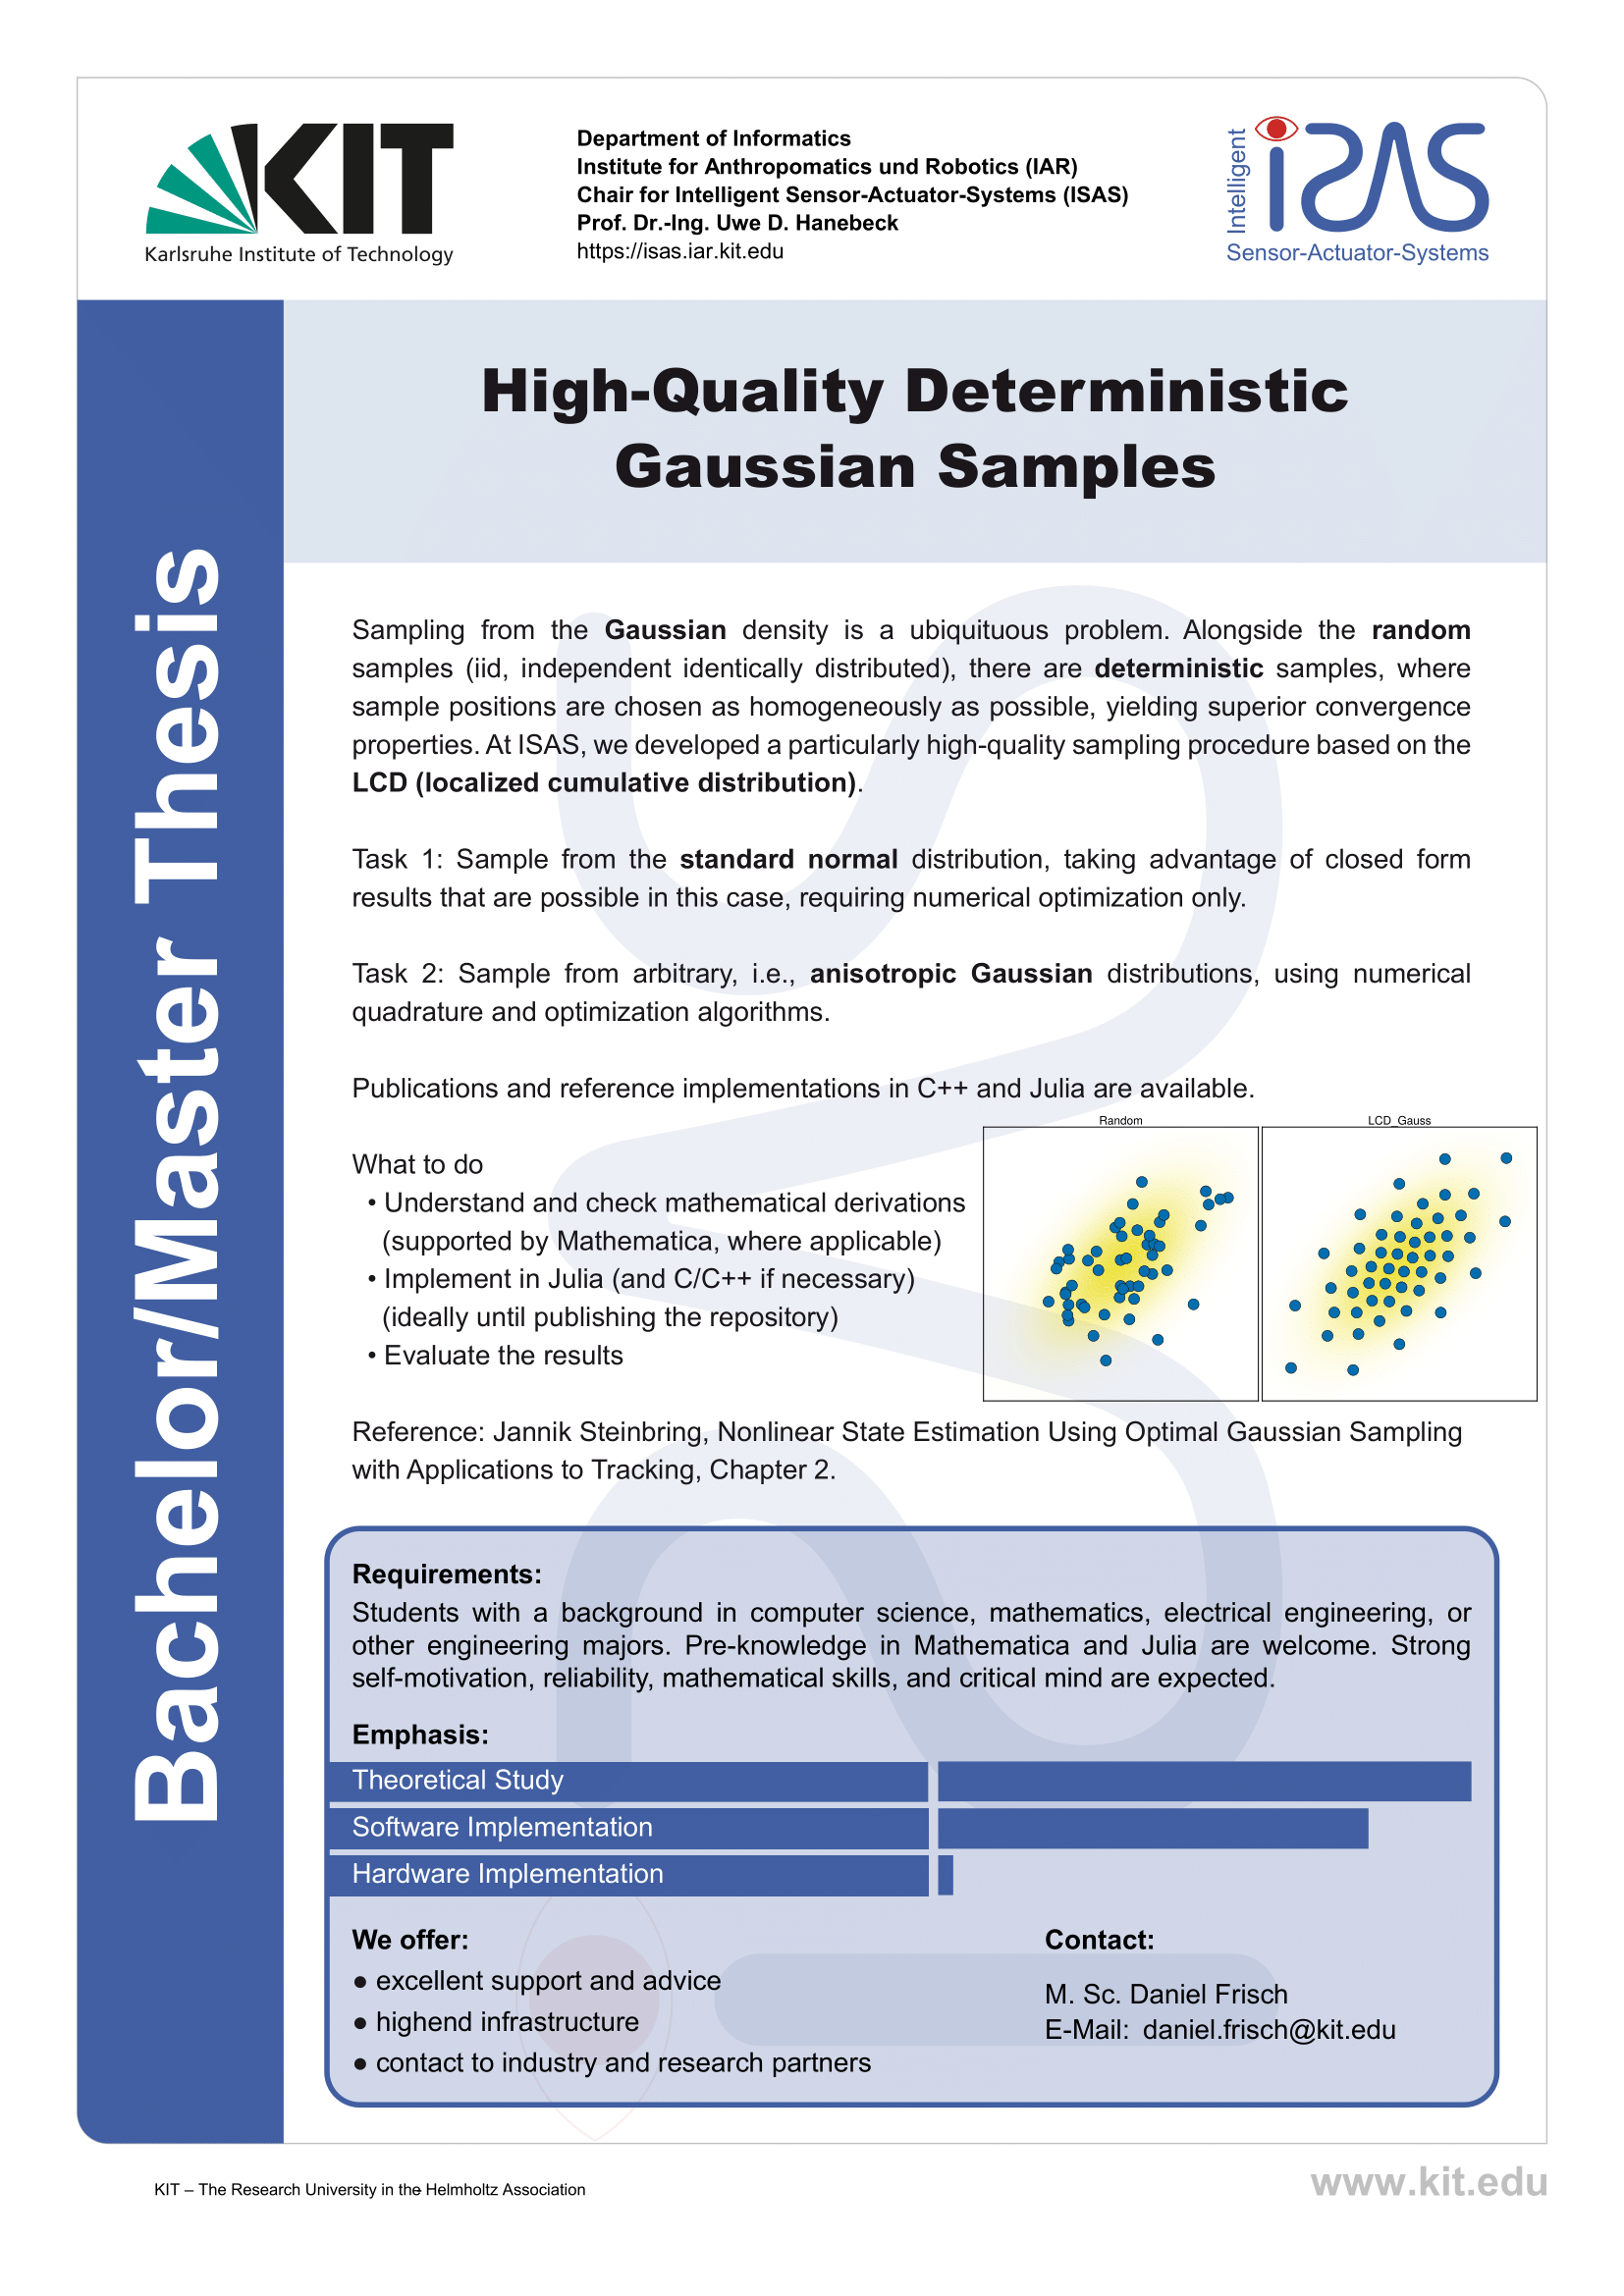 High-Quality Deterministic Gaussian Samples